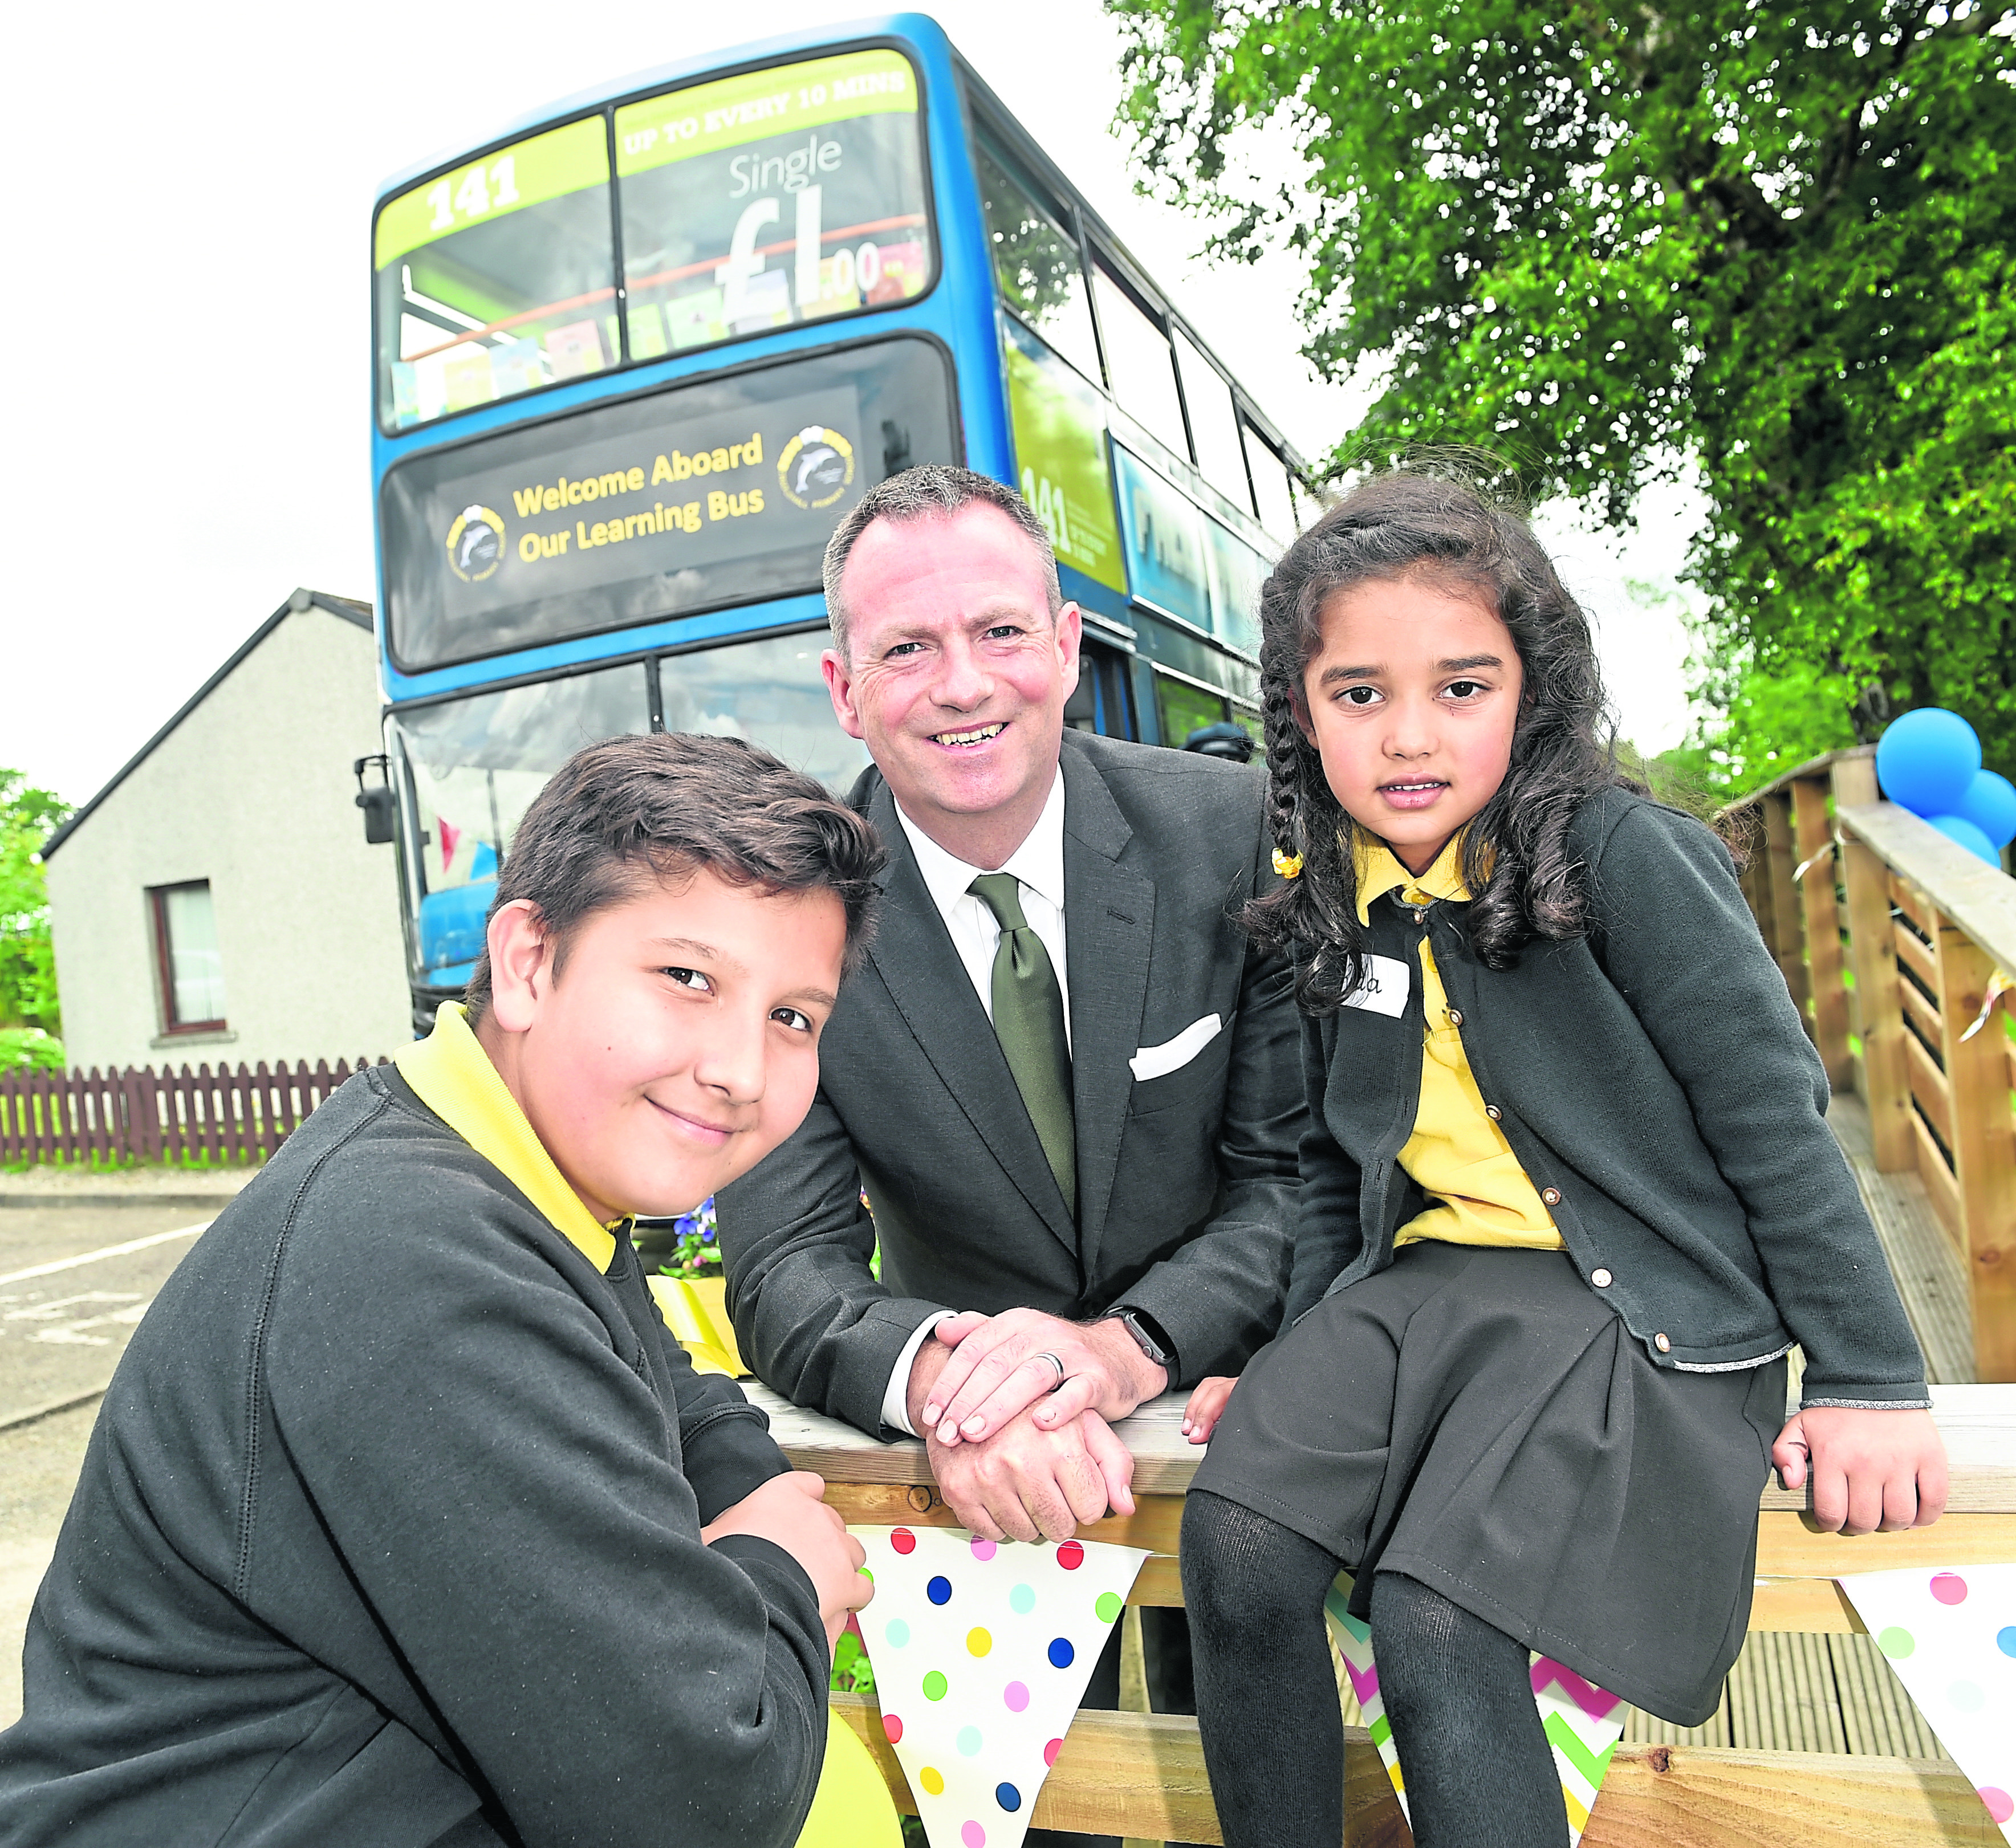 The youngest and the oldest pupils of Cradlehall Primary School, Inverness, Rida Aslam (5) and Ziya Demirel (12) photographed with David Liston, Managing Director of Stagecoach North Scotland and the double decker bus which the company hs donated to the school as a learning facility.
Picture by Sandy McCook